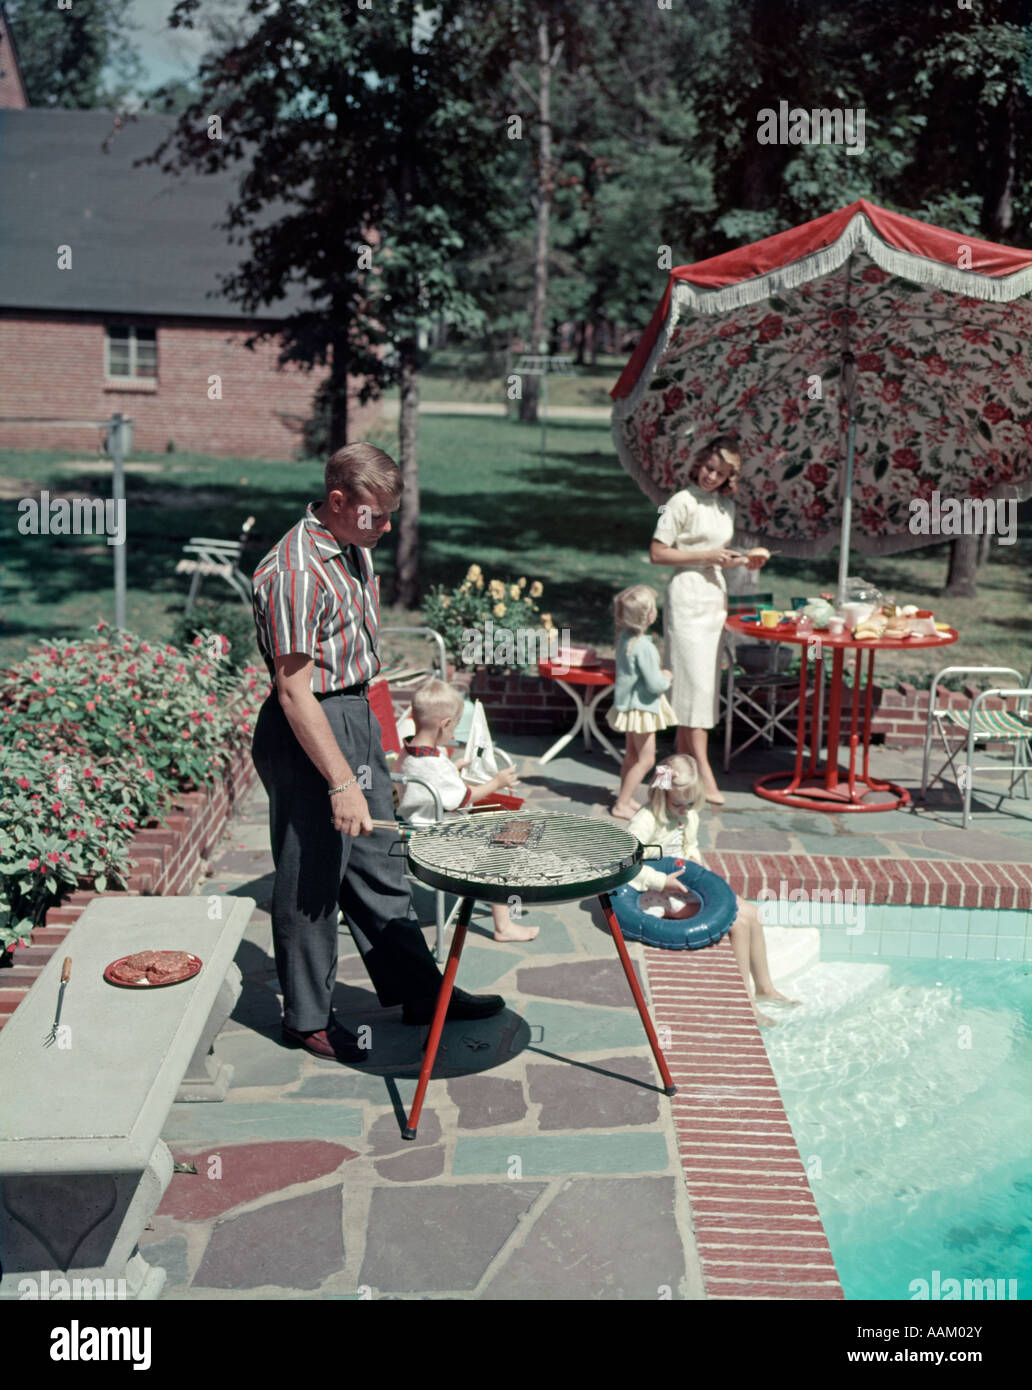 1950s Pool Party